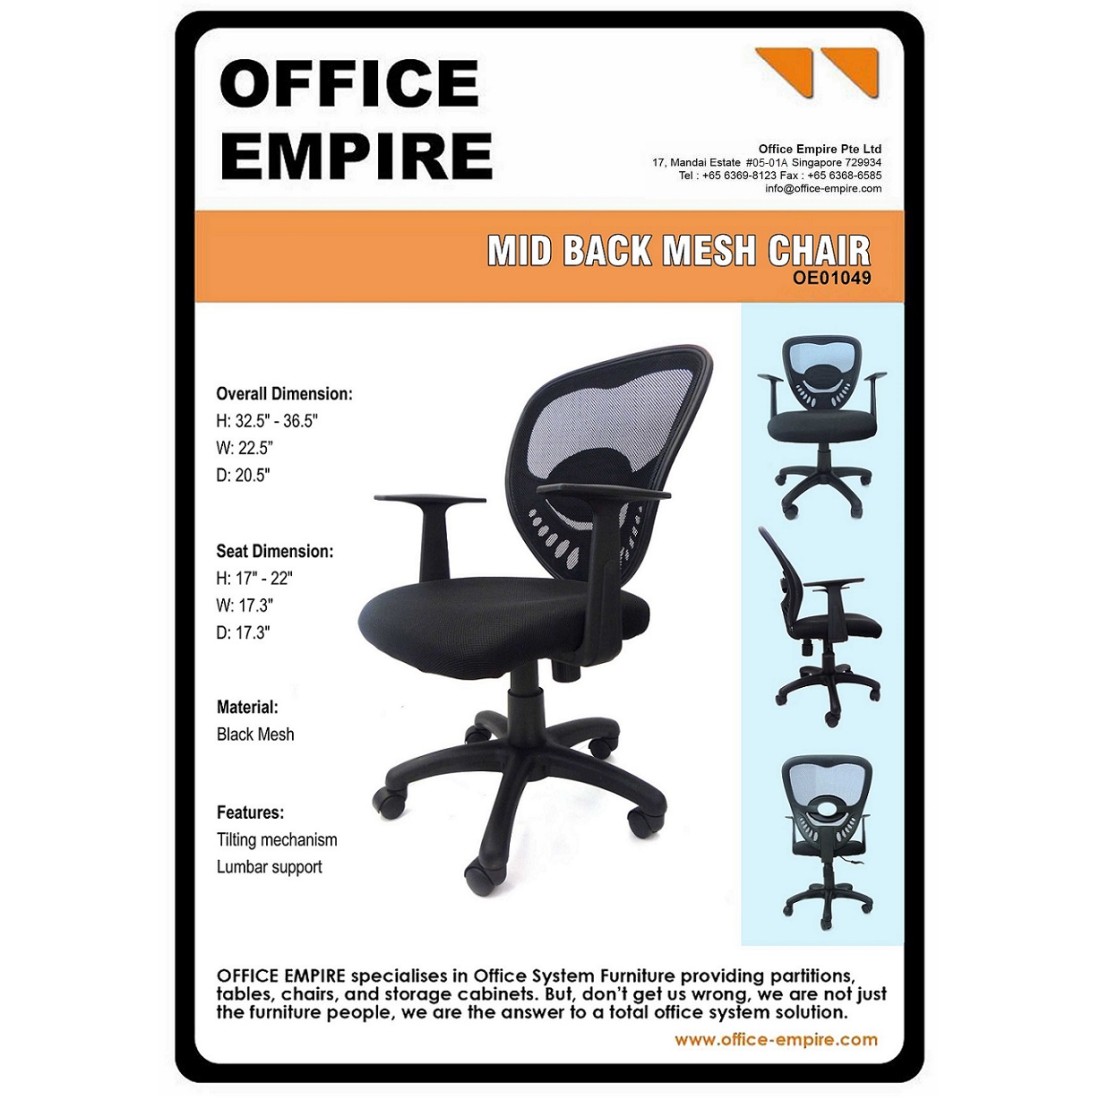 Buy Chairs Singapore | High Quality and Durable Office Furniture